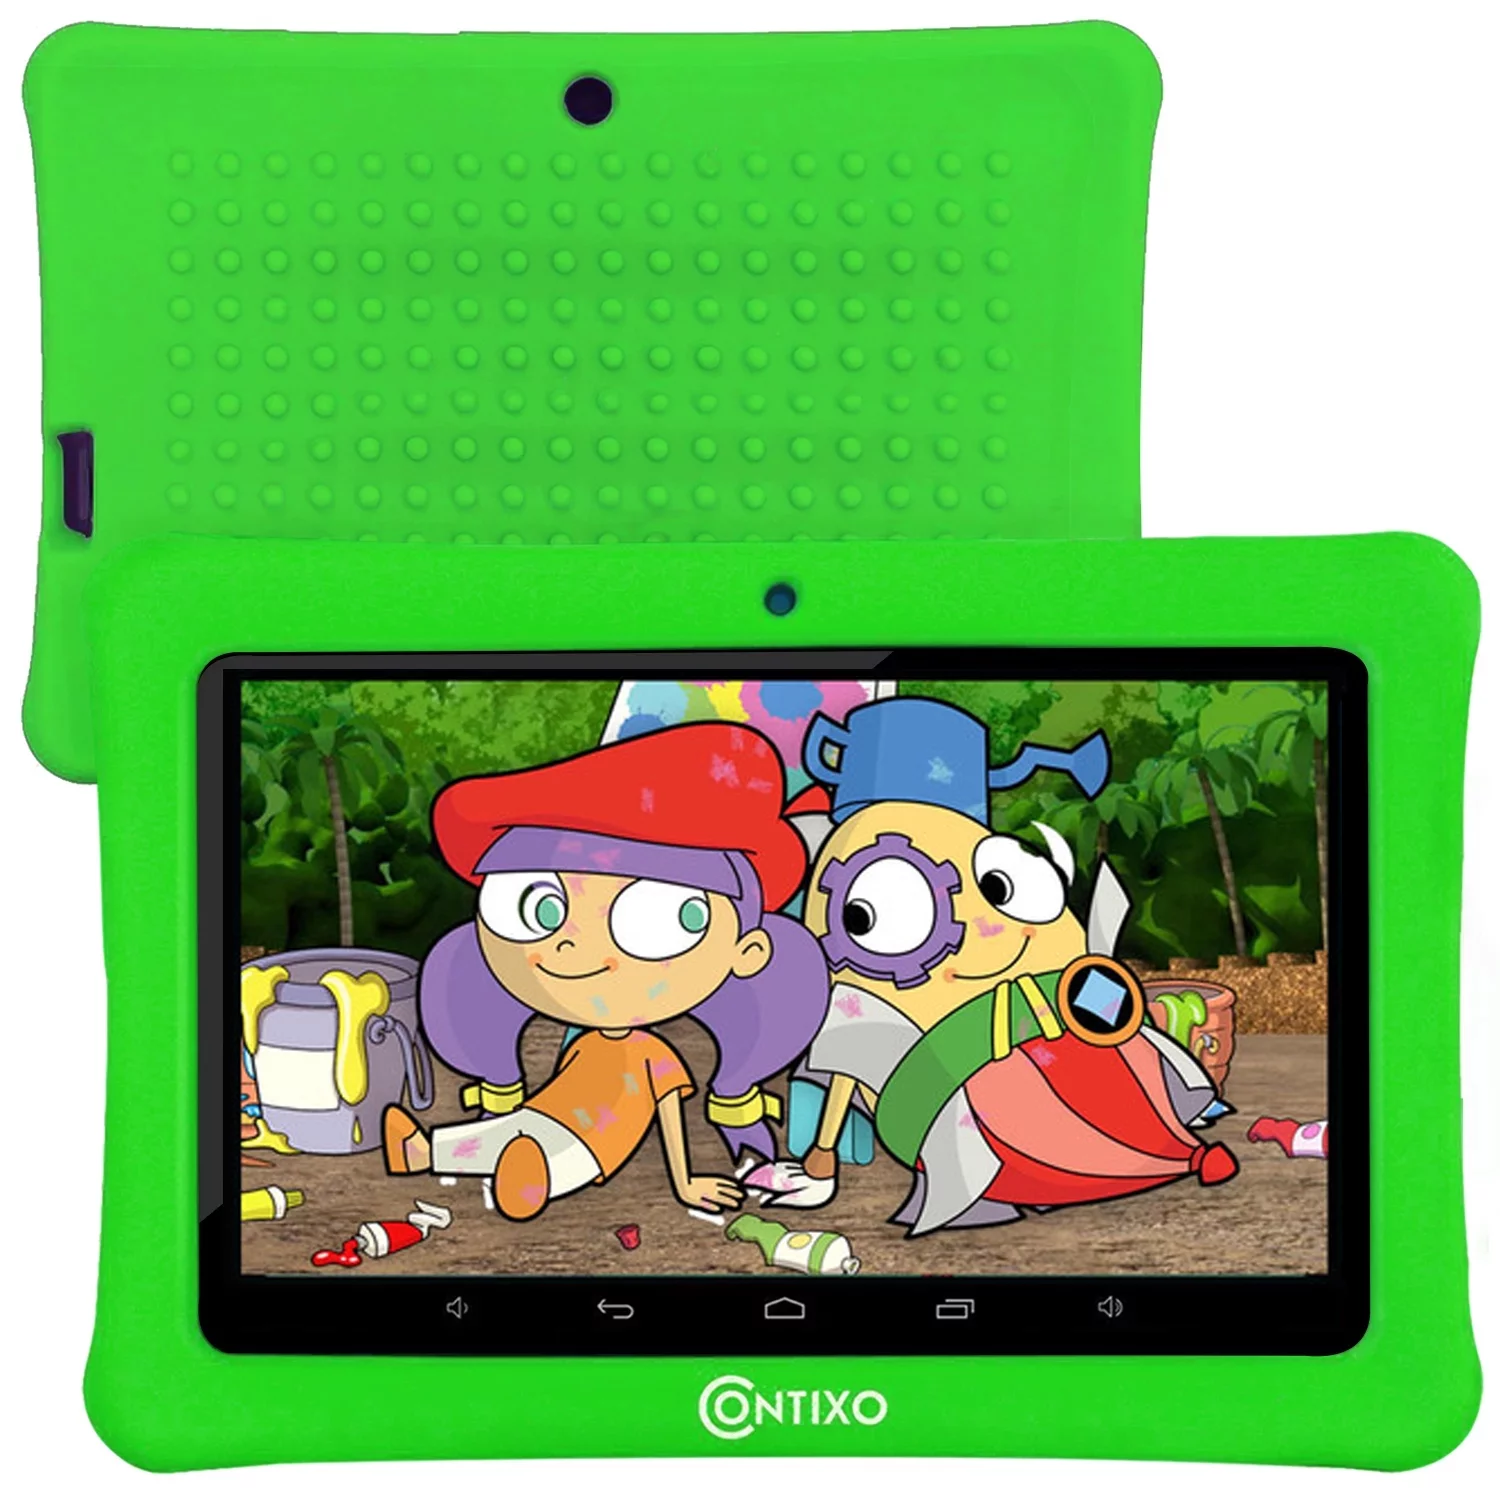 Contixo 7 Inch Kids Tablet with Wi-Fi 16GB 20+Education Learning Apps V8-1-Green